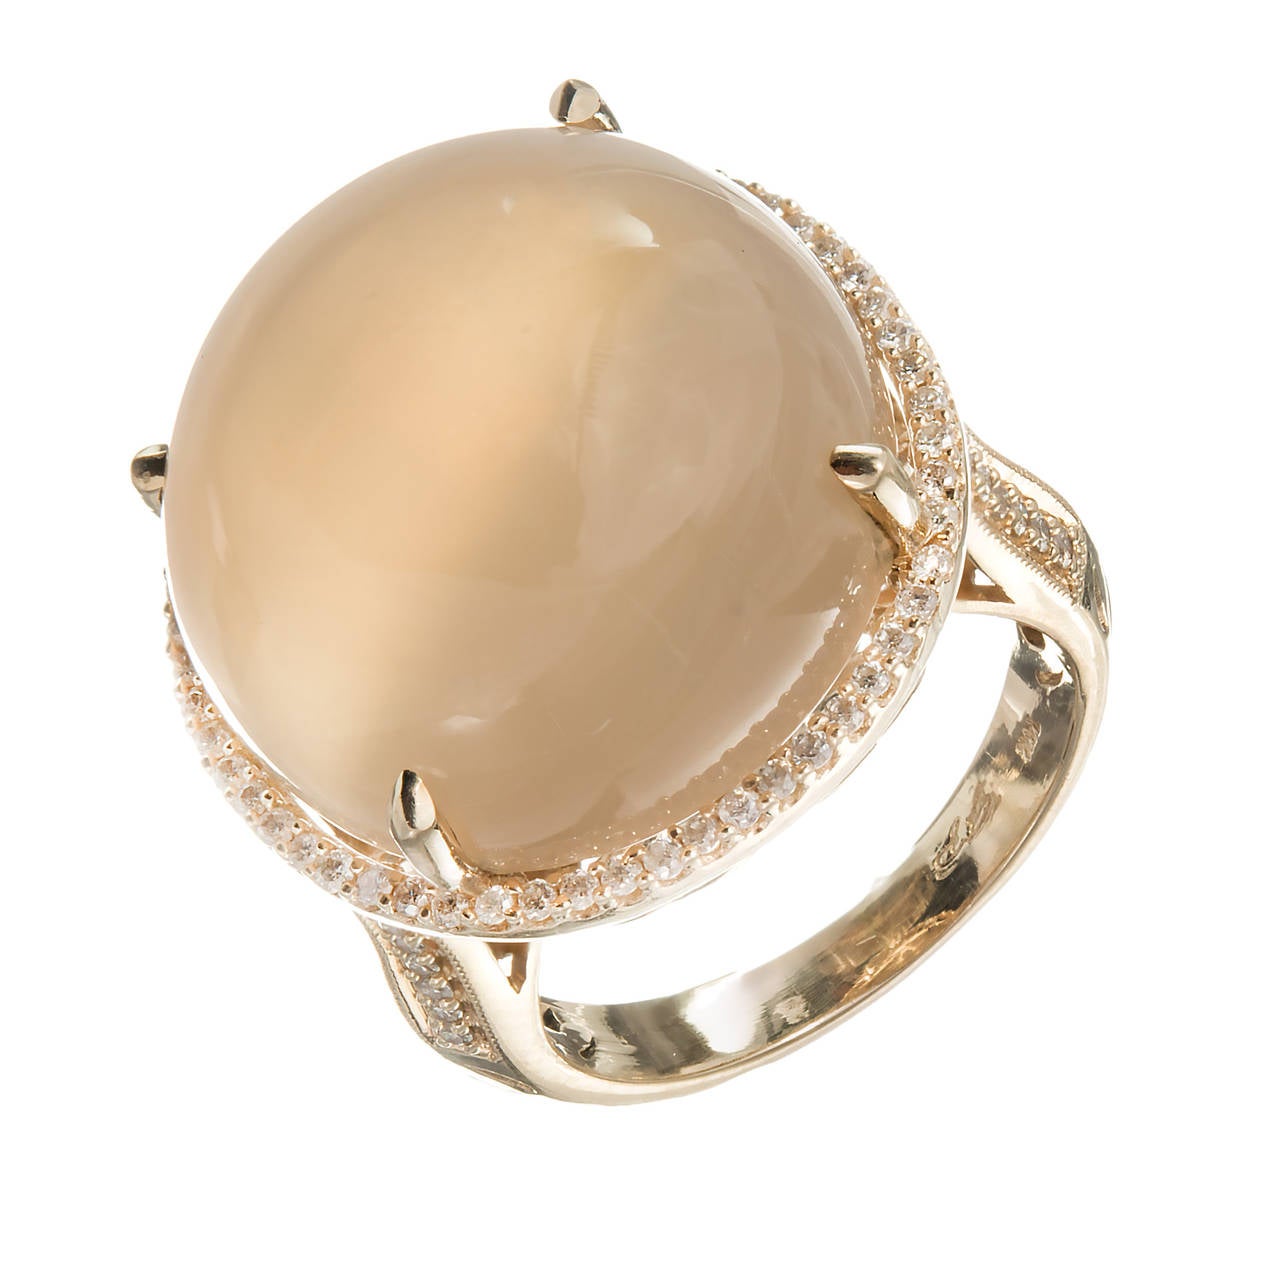 Handmade ring signed by the maker GP hand bead set with 114 full cut sparkly diamonds, hand engraved shank and heart gallery. The center is set with a one of a kind natural translucent peach color Moonstone.

1 round cabochon peach Moonstone,